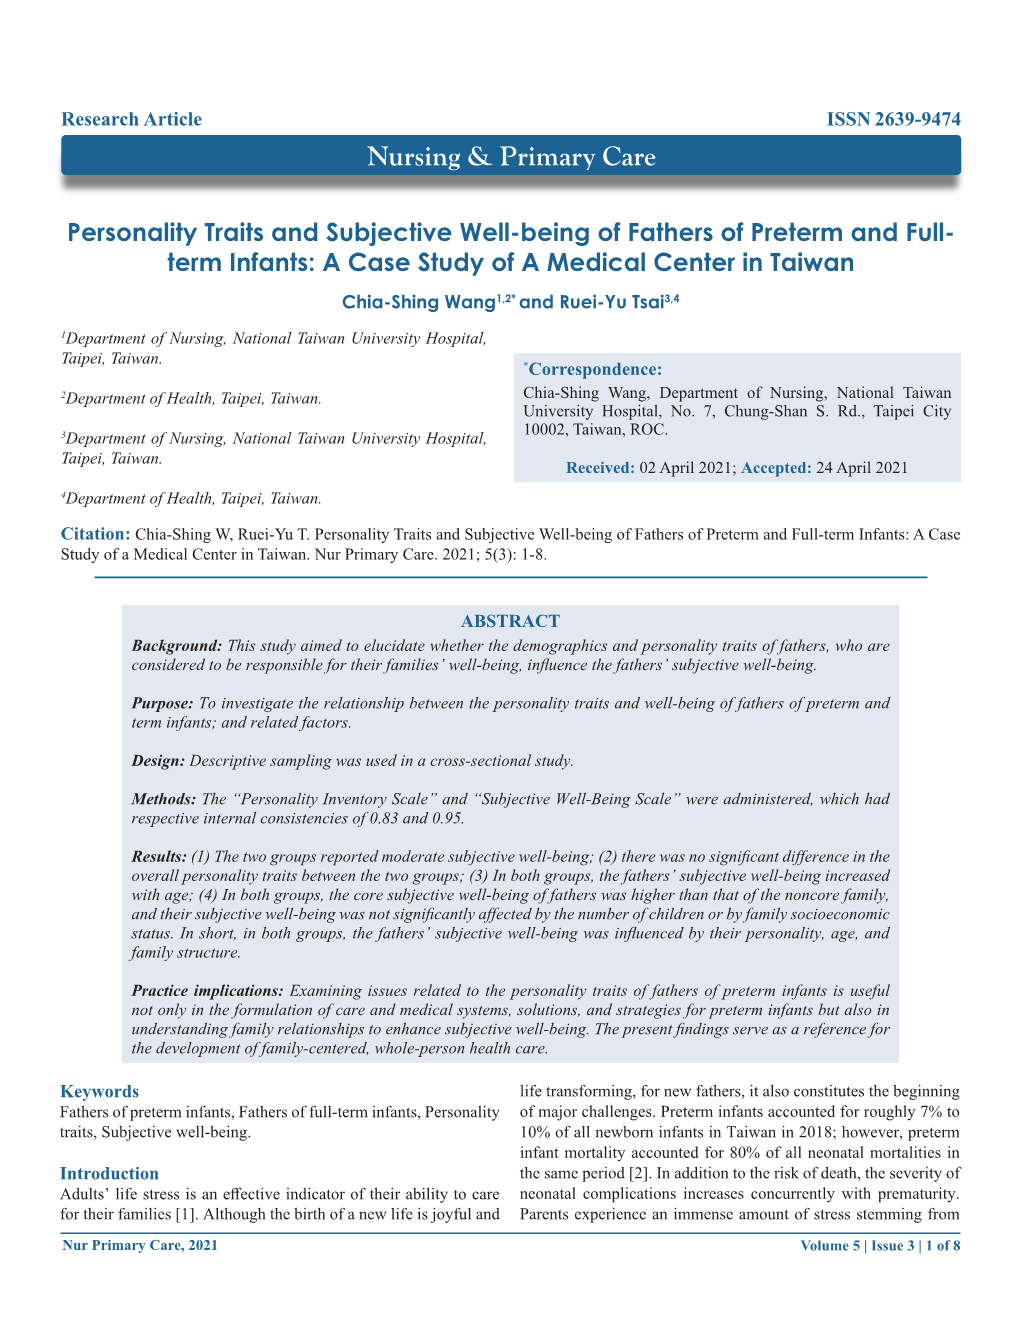 Personality Traits and Subjective Well-Being of Fathers of Preterm and Full-Term Infants: a Case Study of a Medical Center in Taiwan